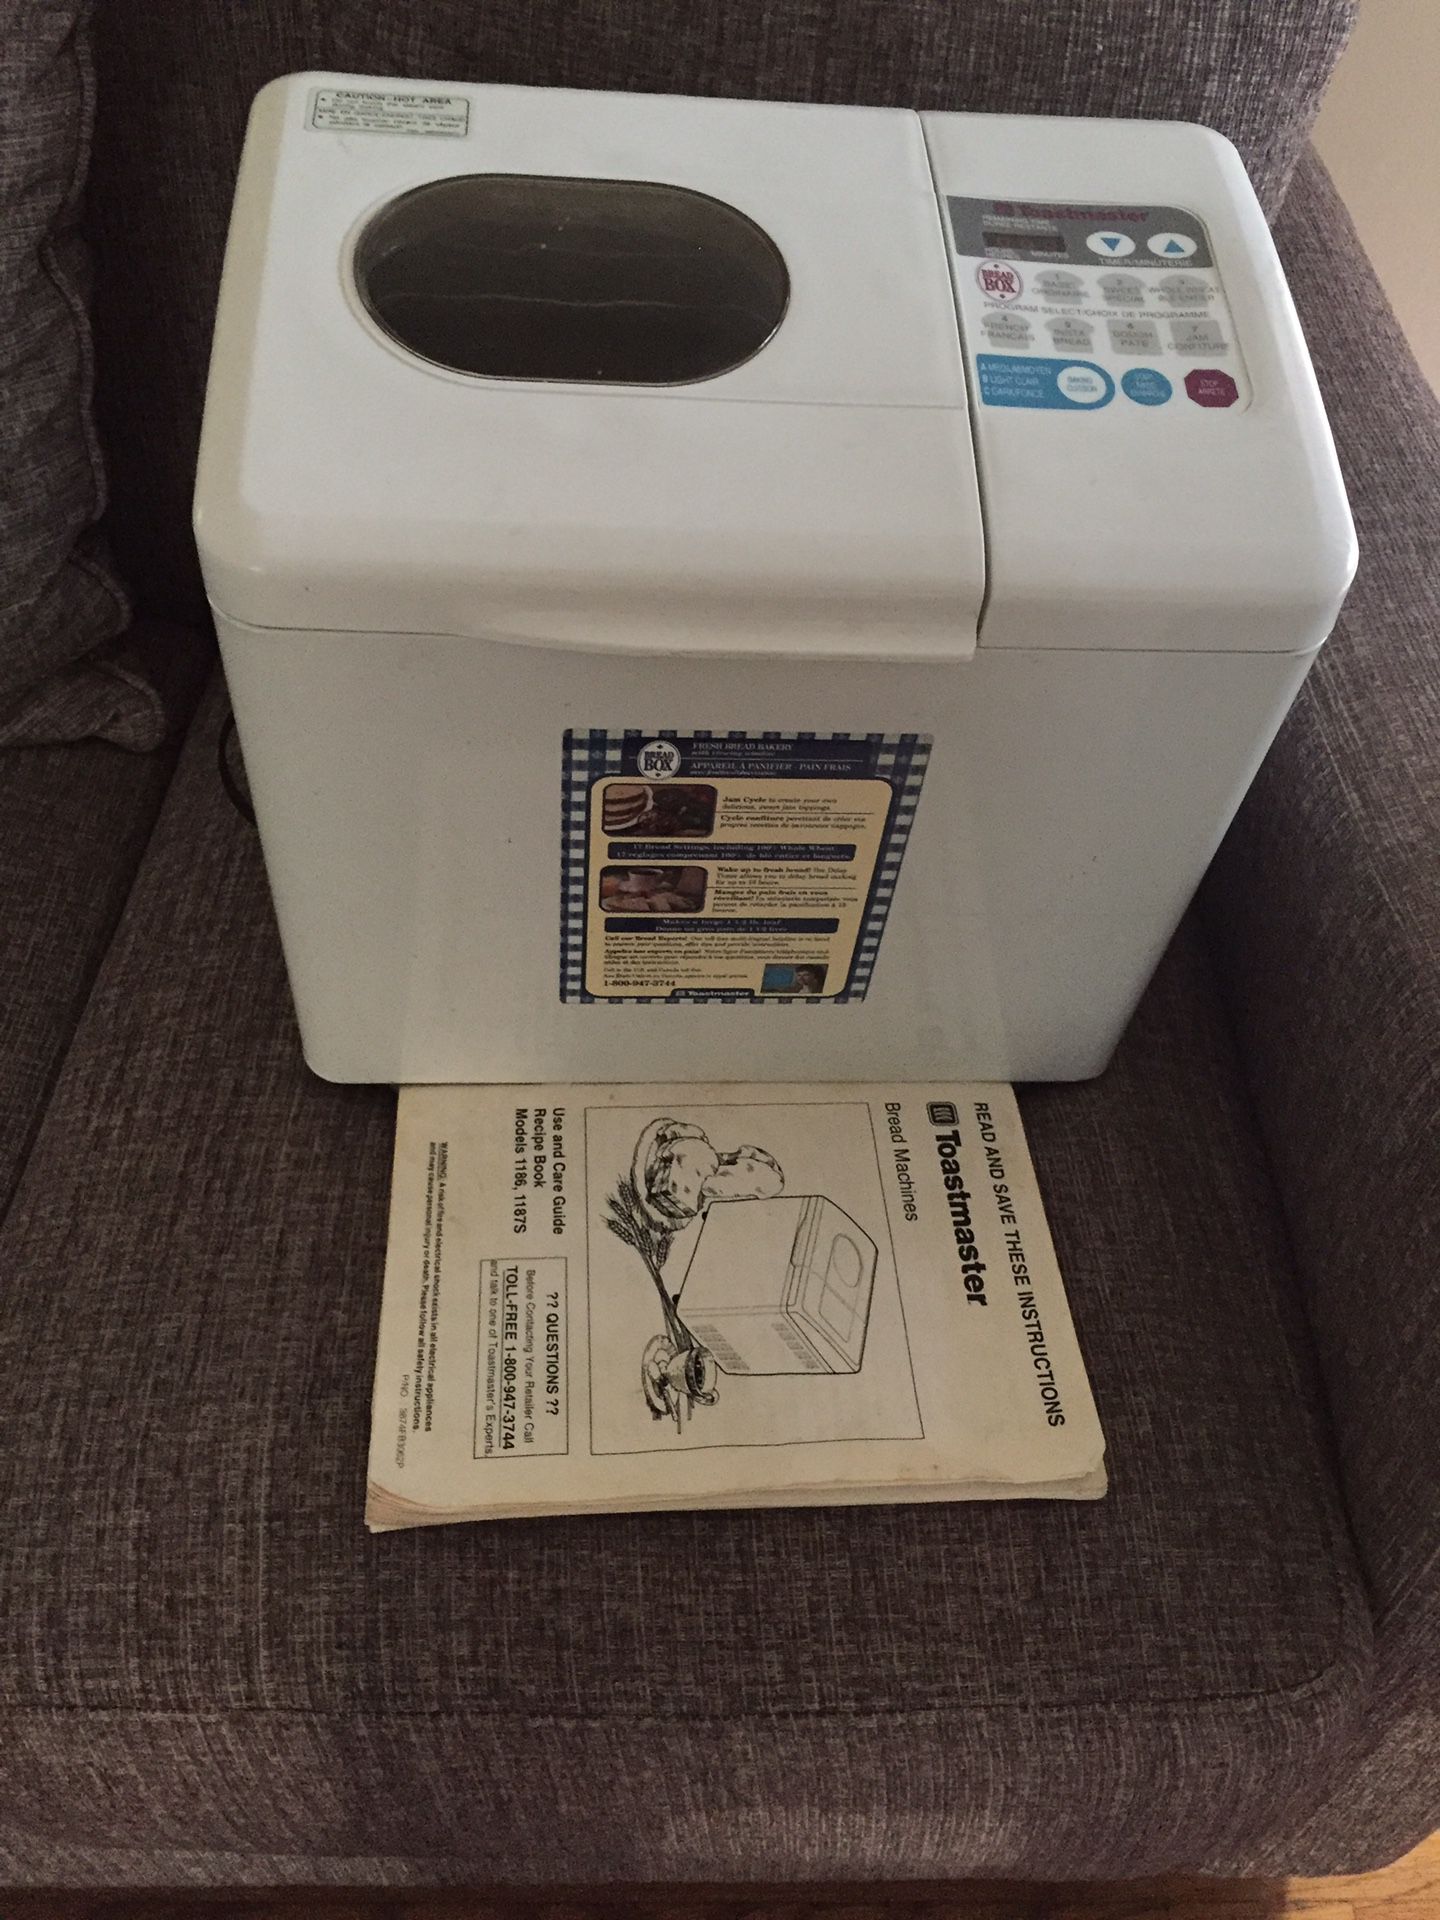 Like new ToastMaster Bread maker w manual book